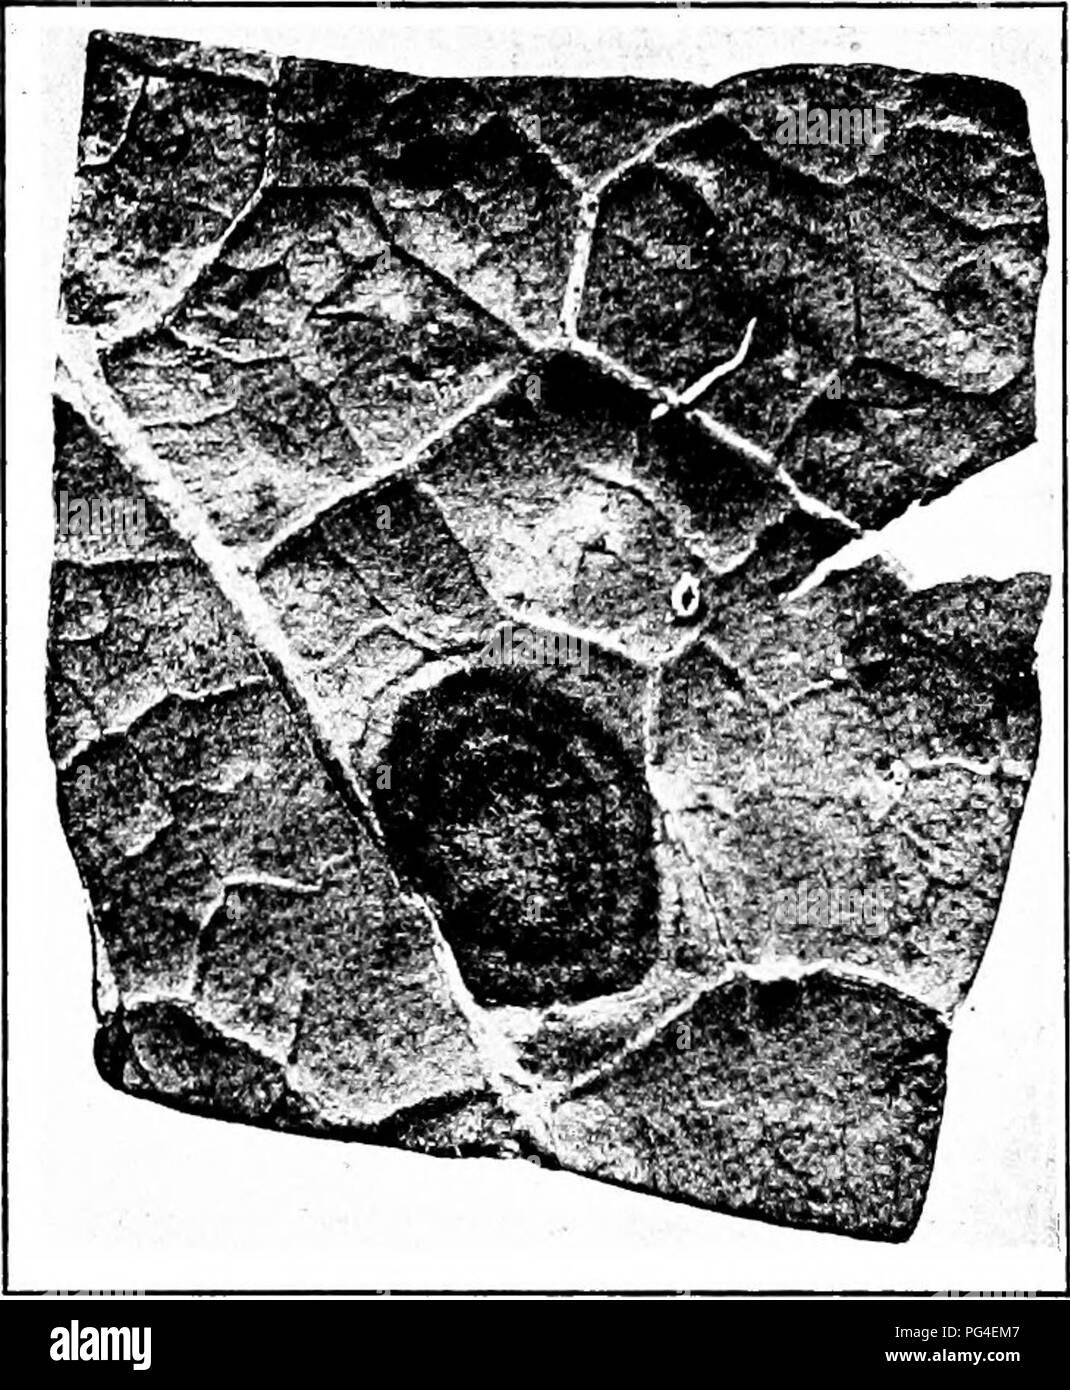 . Diseases of economic plants . Plant diseases. 230 DISEASES OF ECONOMIC PLANTS Black mold (Alternaria Brassicoe (Berk.) Sacc). — The affected spots are nearly black, marked concentrically, are circular, and are not definitely bordered, i.e., they shade off gradually into the surrounding healthy tissue.. Fig. 108. — Collard black mold as seen from upper side of the leaf. Original. They enlarge sometimes to 2-3 cm. in diameter. The tissue dries, becomes brittle, and often falls away, leaving ragged holes. The general appearance of the spot as seen from above is pale green; as seen from the lowe Stock Photo